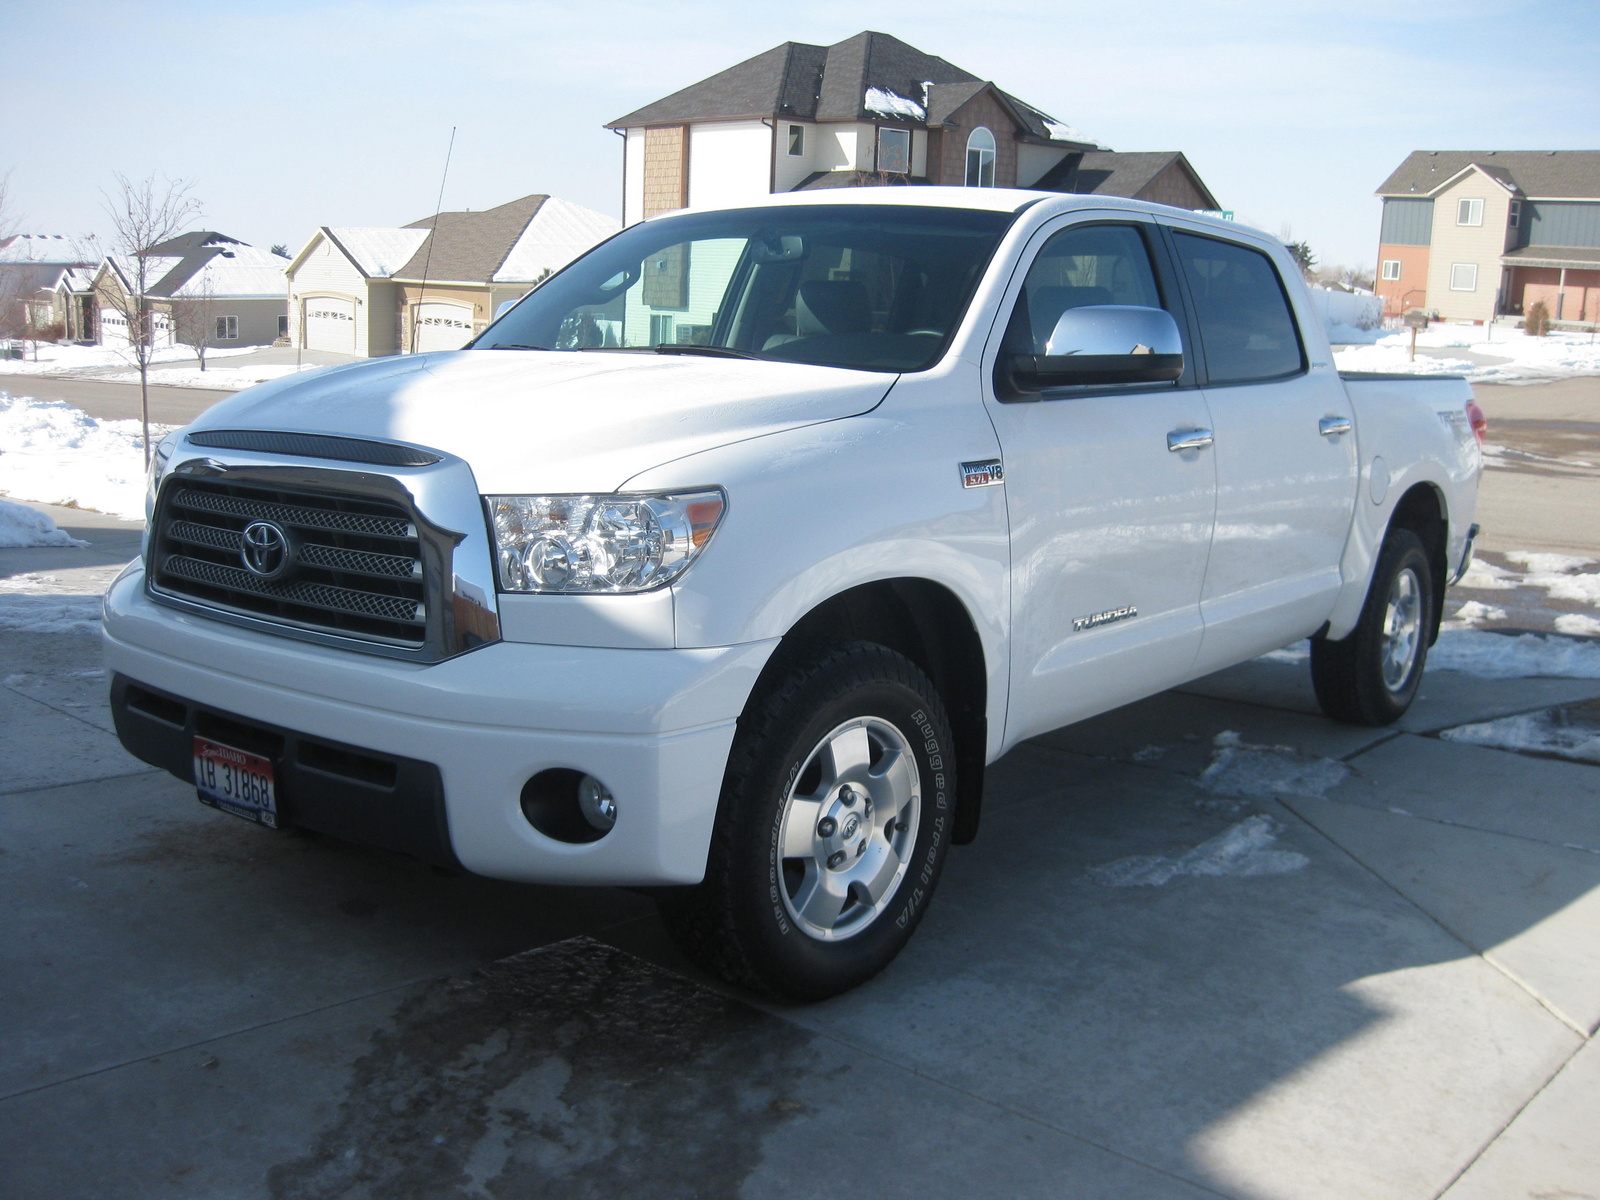 2007 toyota tundra crewmax limited review #7